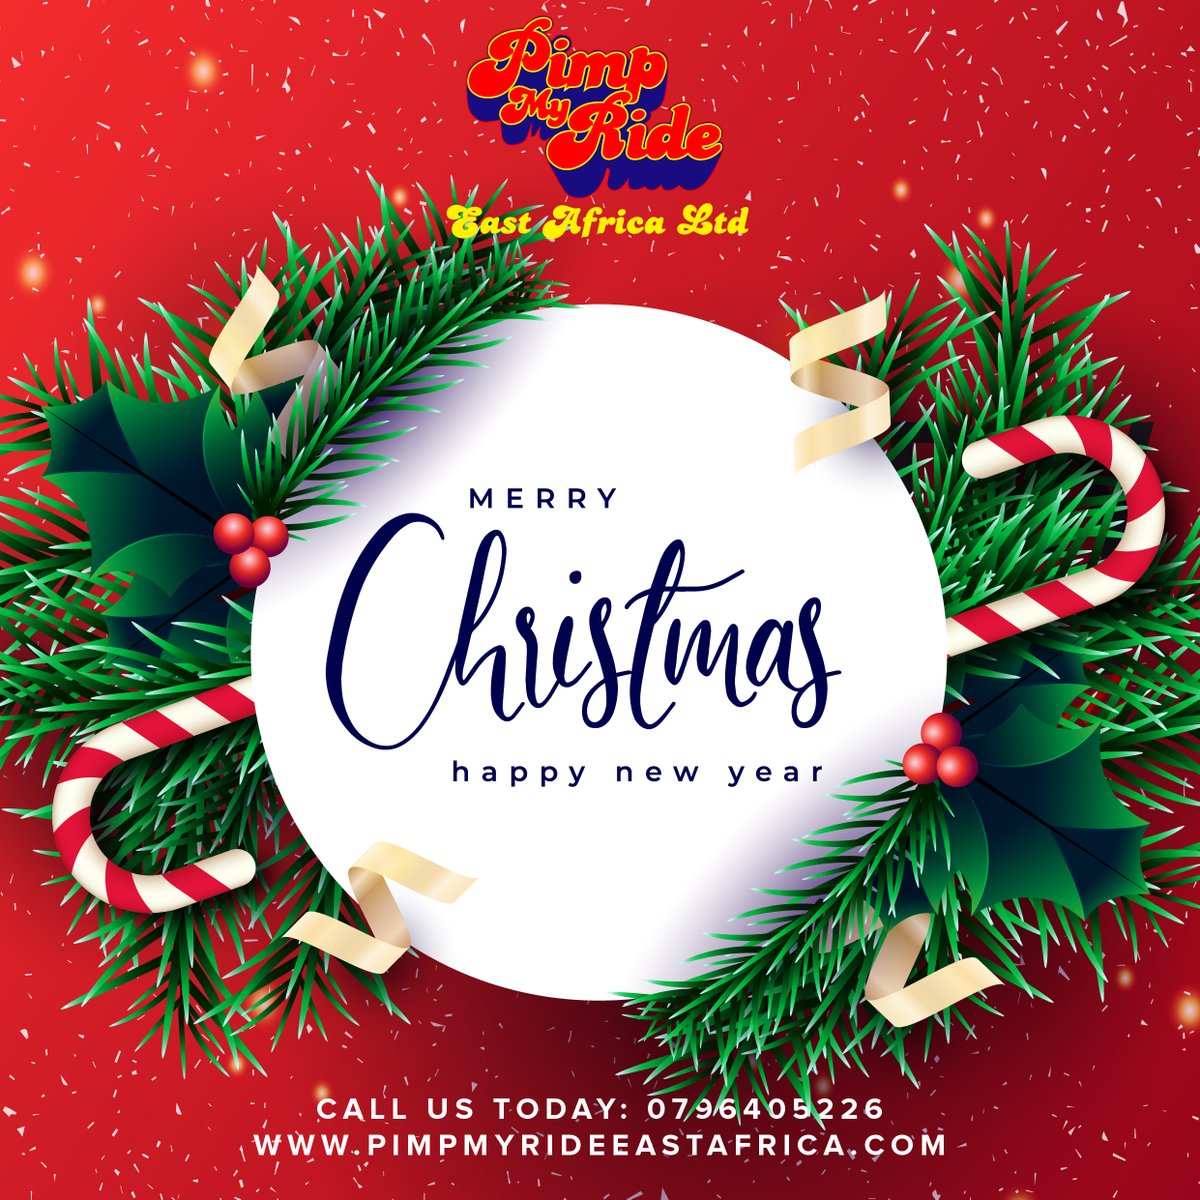 May God give you all the good things you are looking for. To our faithful clients, Merry Christmas. #pimpmyride #xmas2020 #happyholidays #happynewyear